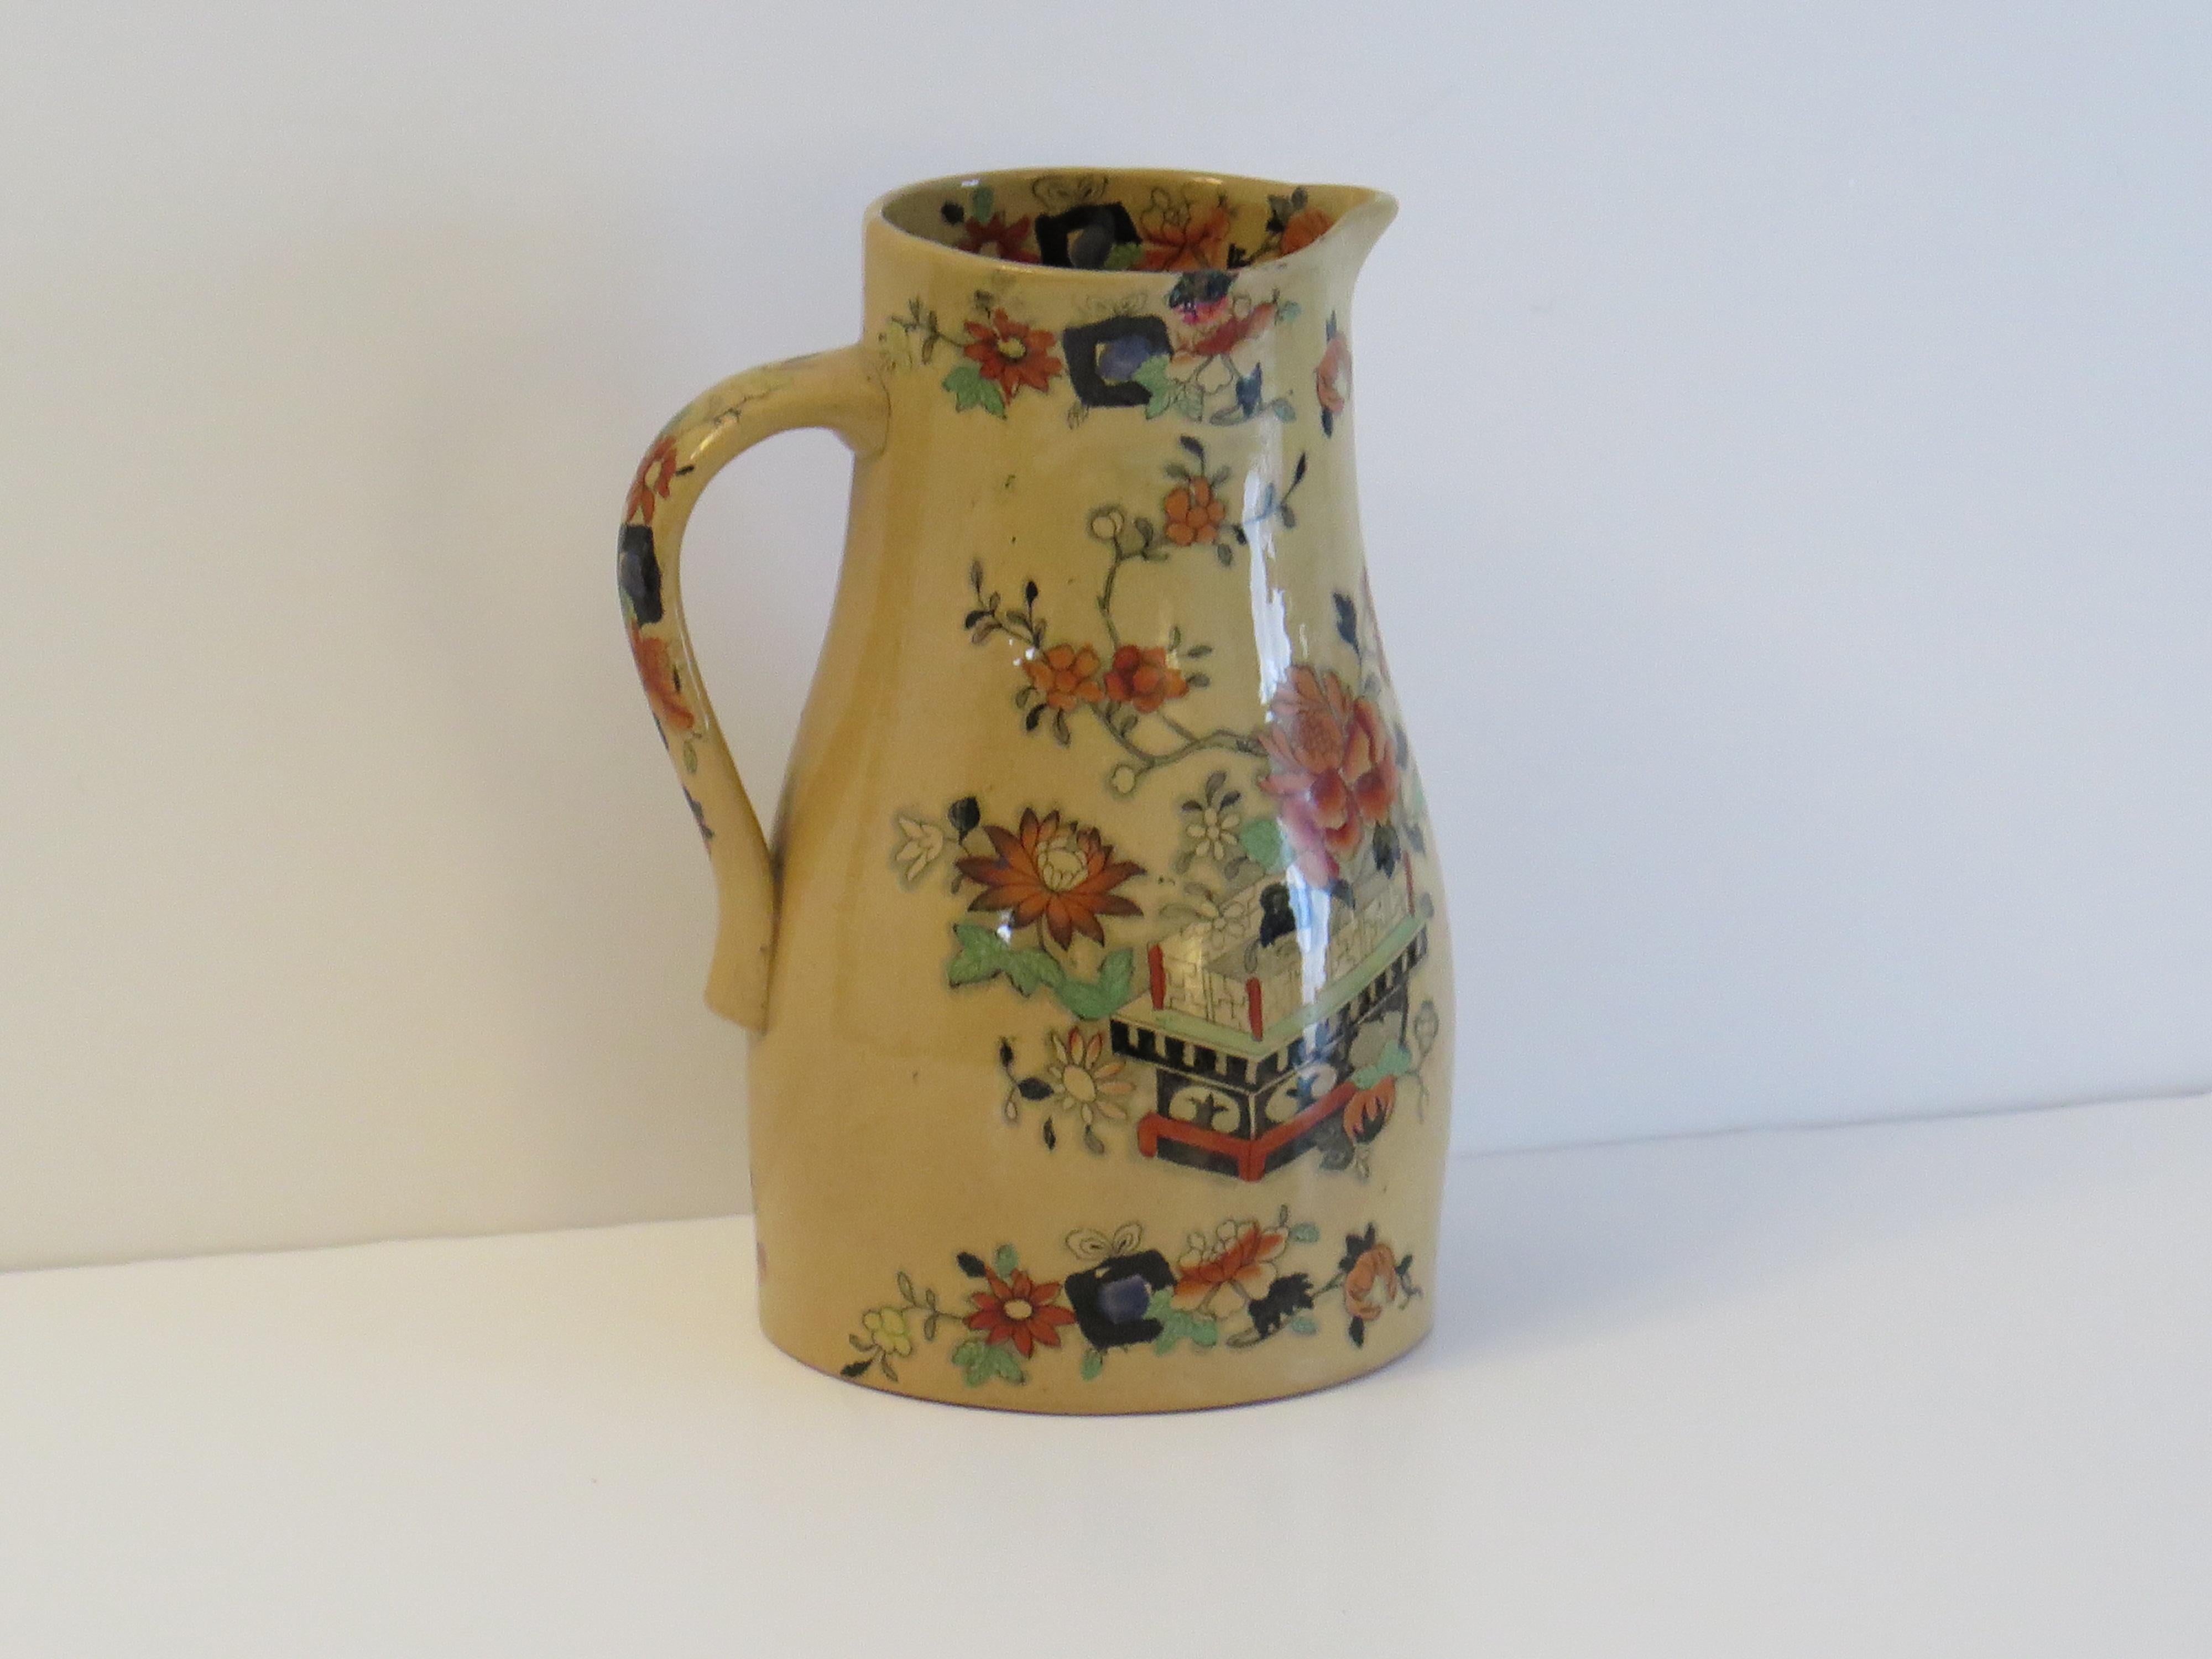 This is a fairly large jug or pitcher by Mason's Ironstone pottery in the flower box pattern all dating to the mid-19th century, circa 1830-1851 Victorian period.

This Mason's jug has a rare shape and pattern, with a beautiful ochre glaze with